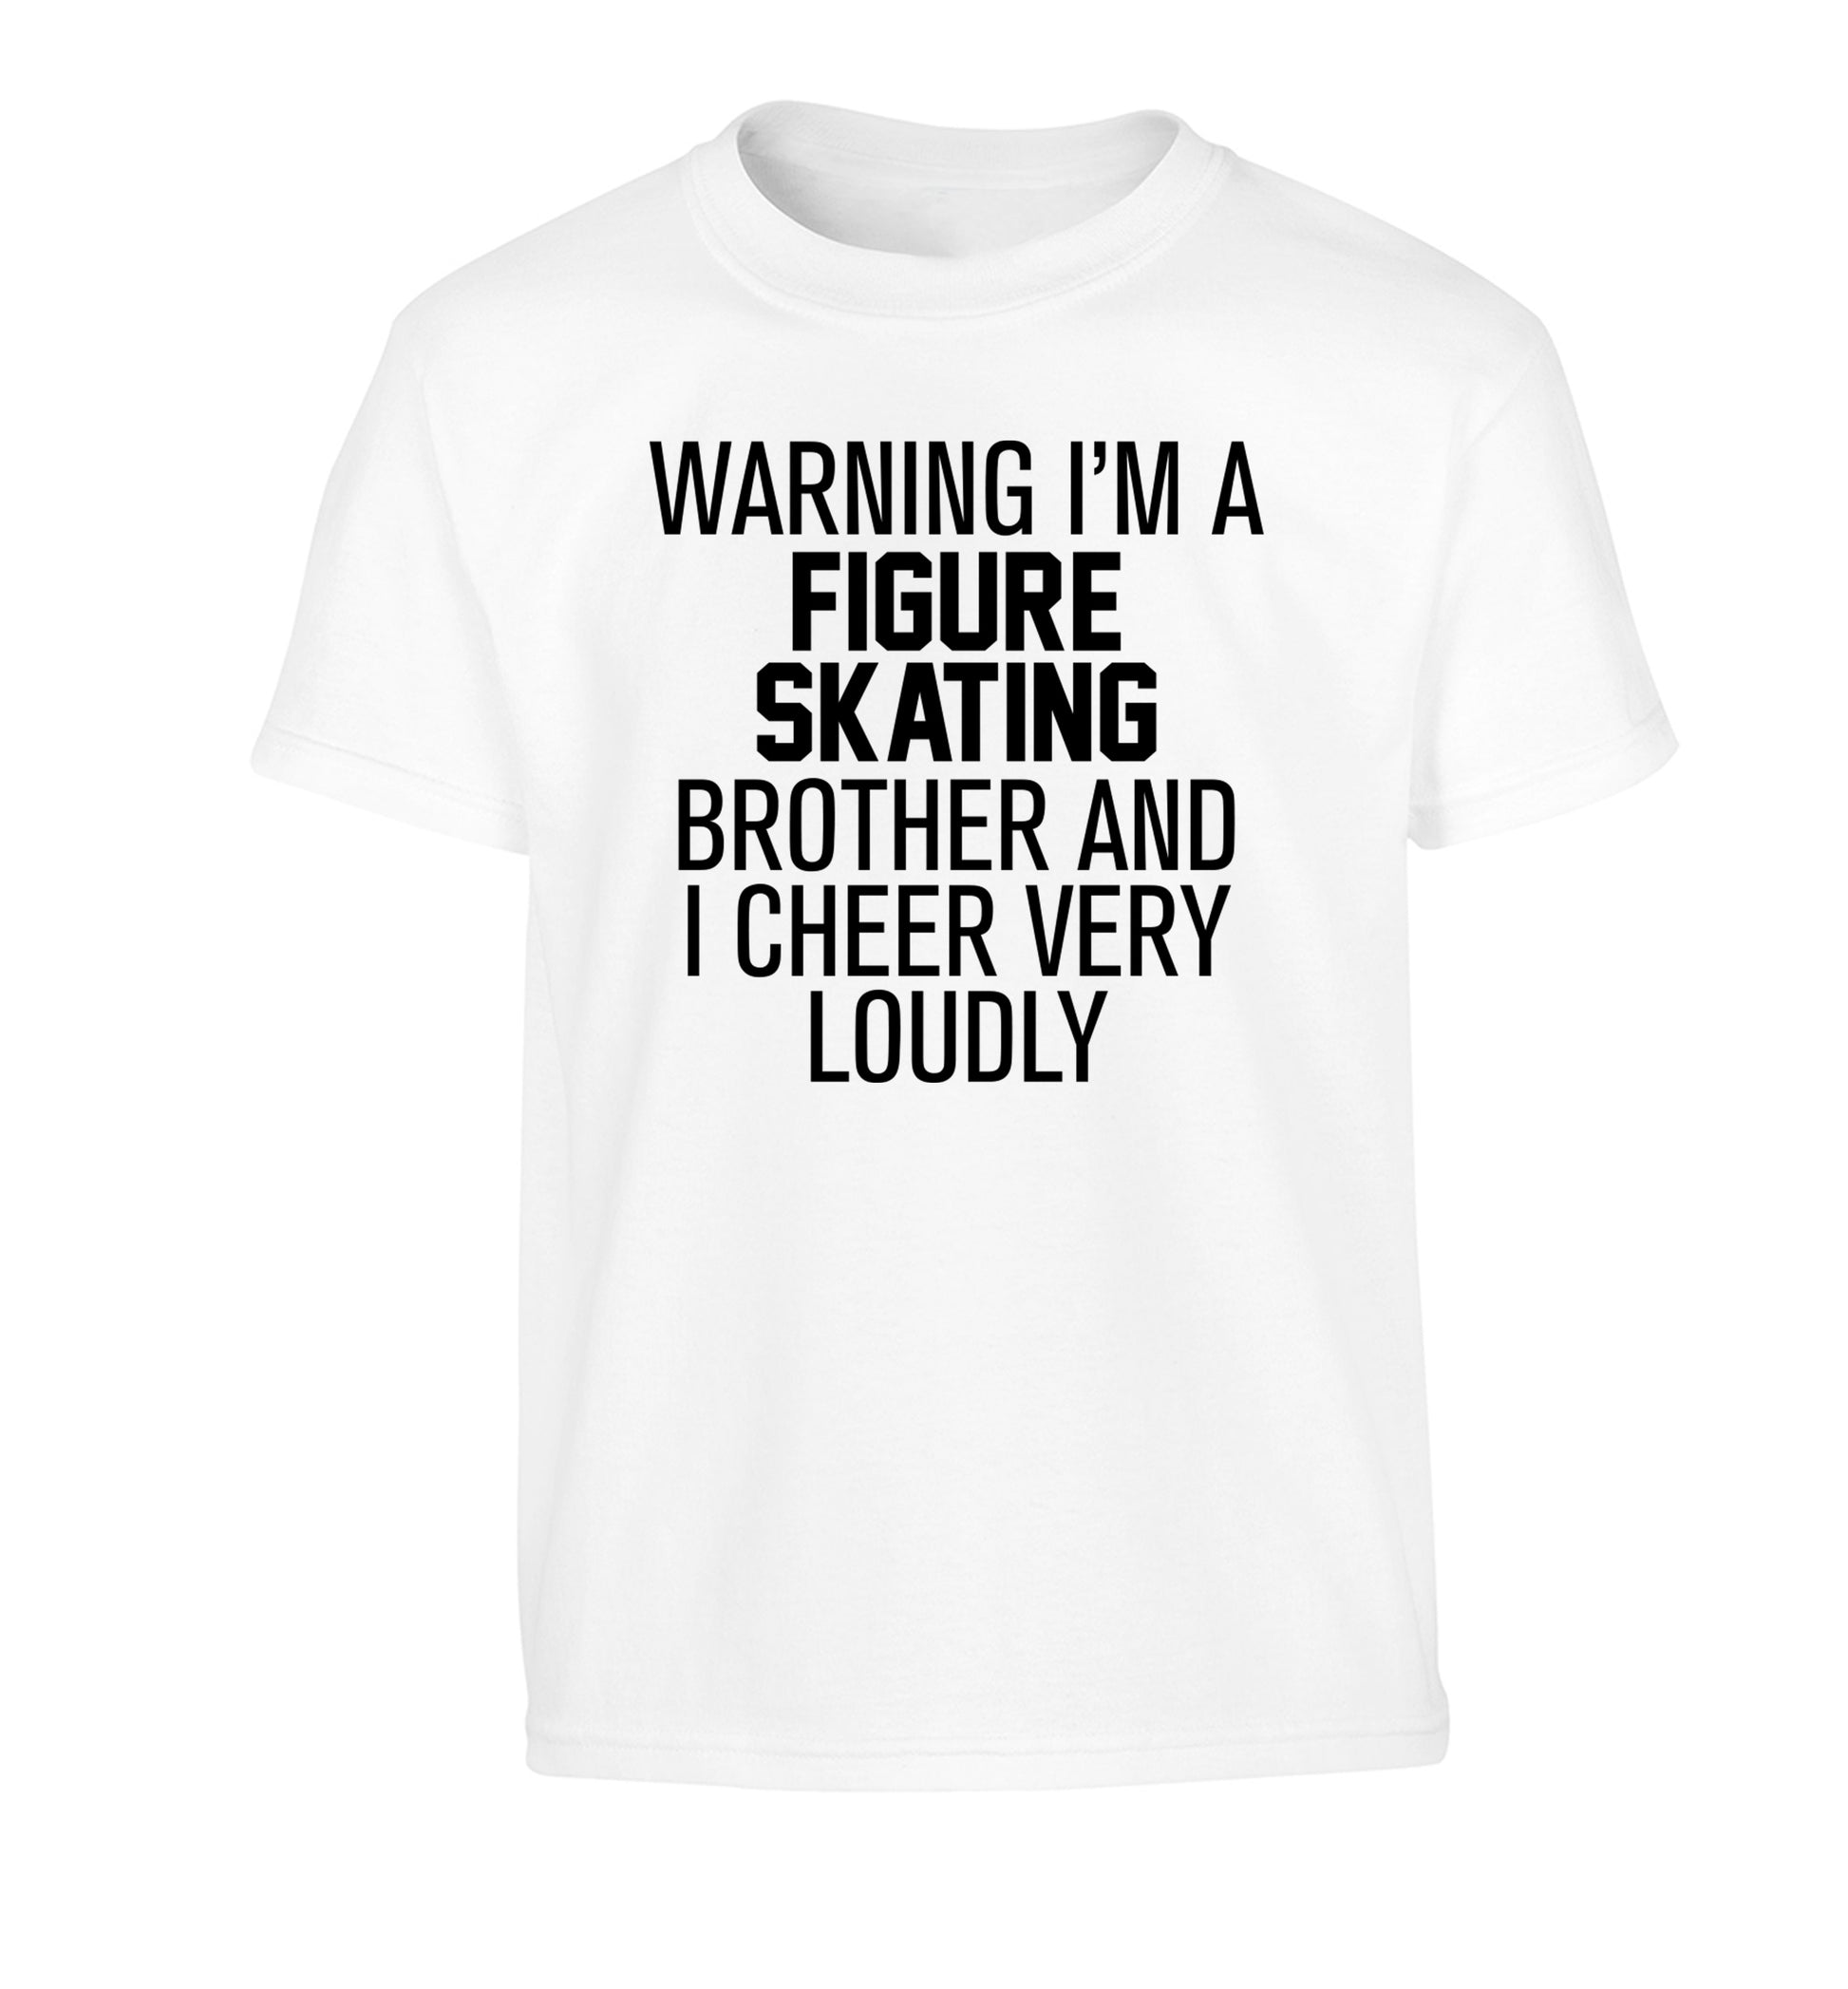 Warning I'm a figure skating brother and I cheer very loudly Children's white Tshirt 12-14 Years